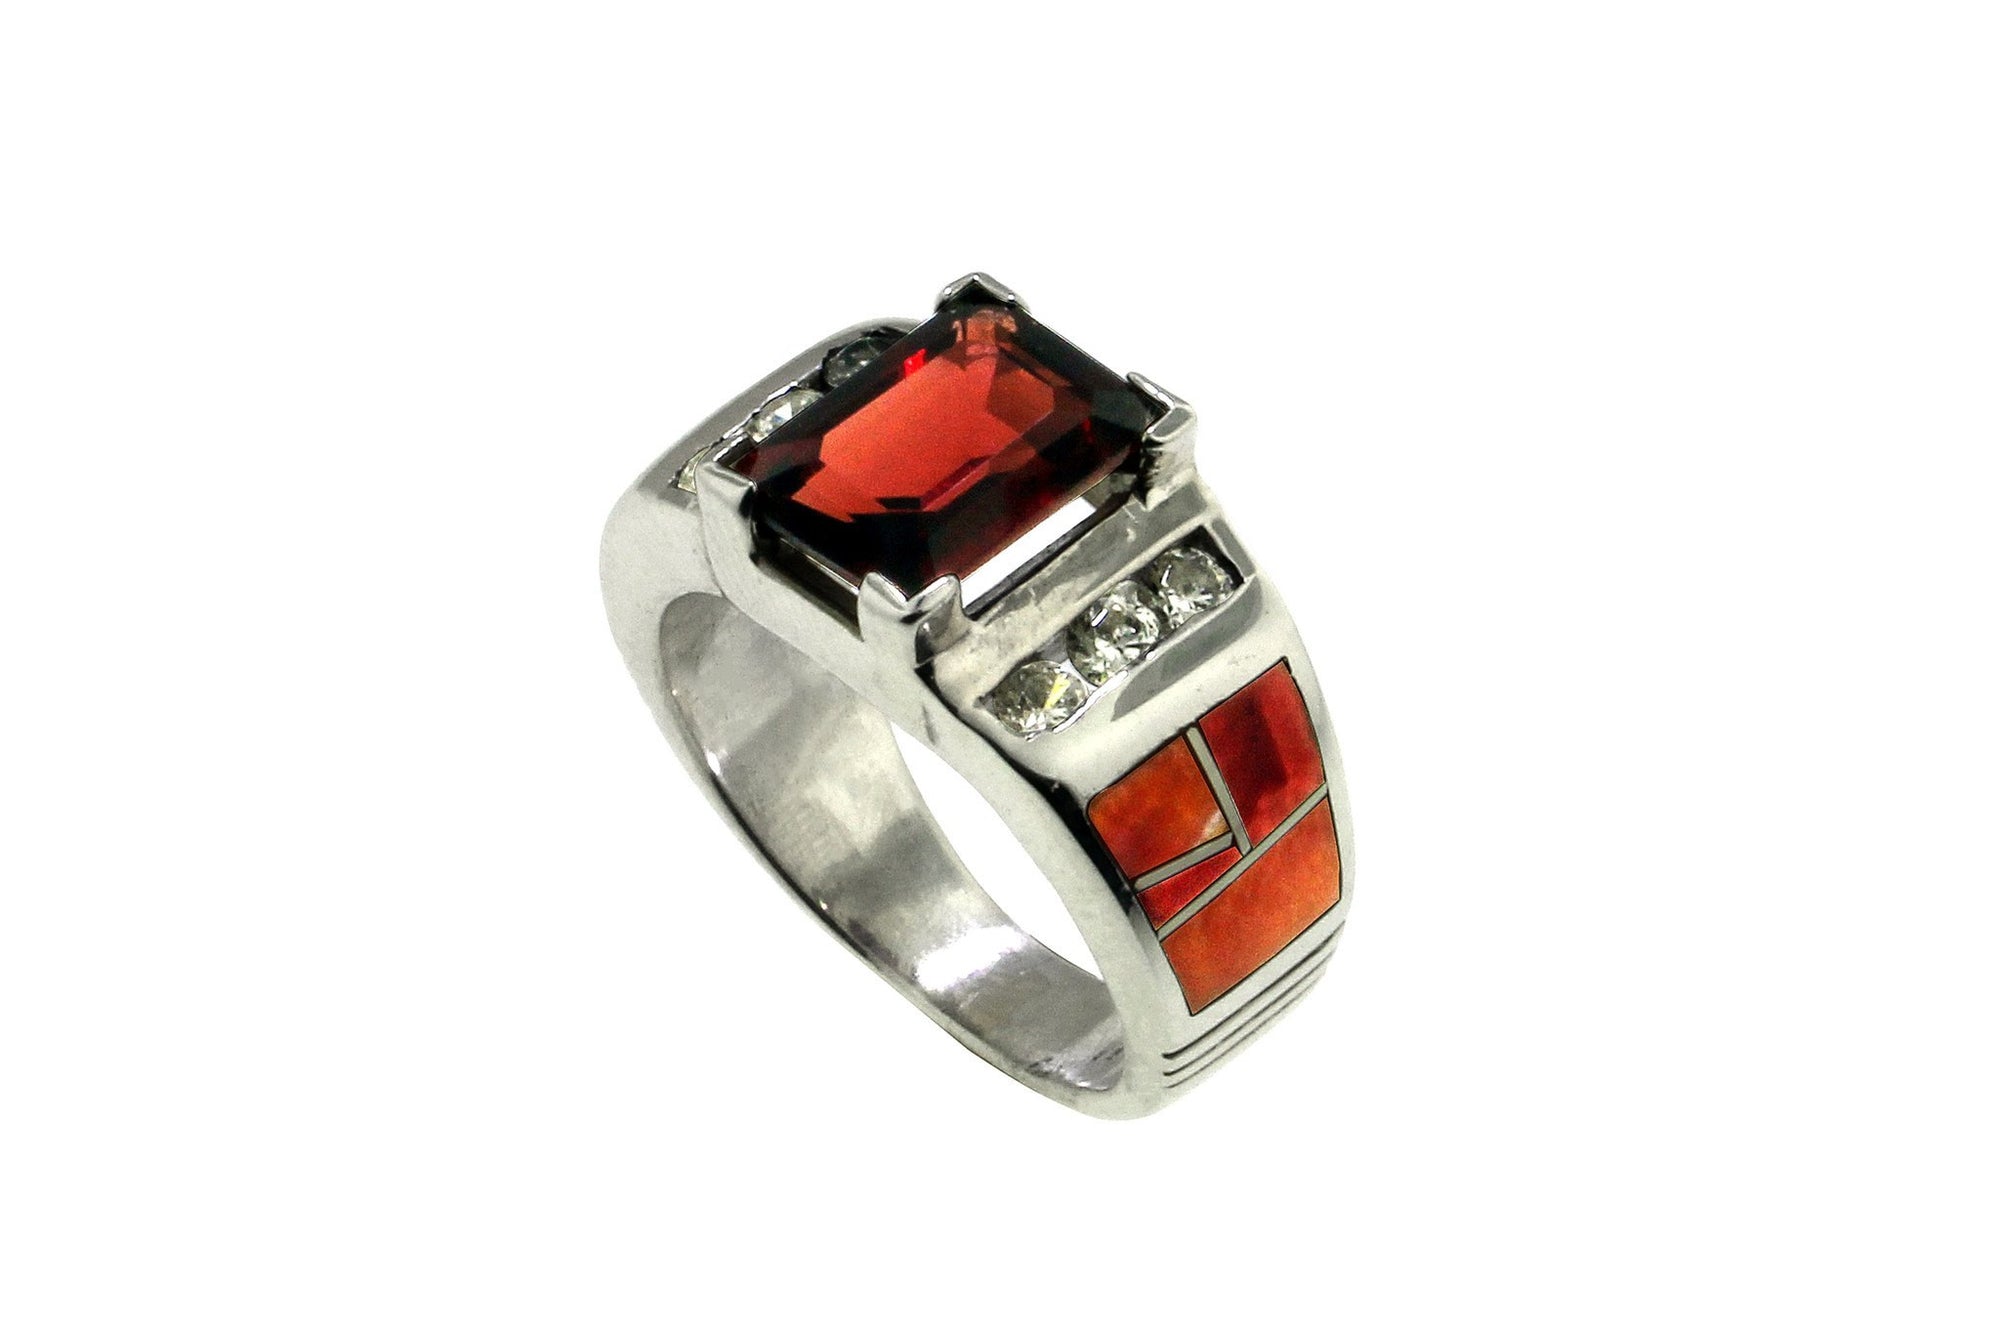 Native American Jewelry - David Rosales Spiny Oyster & Garnet Ring